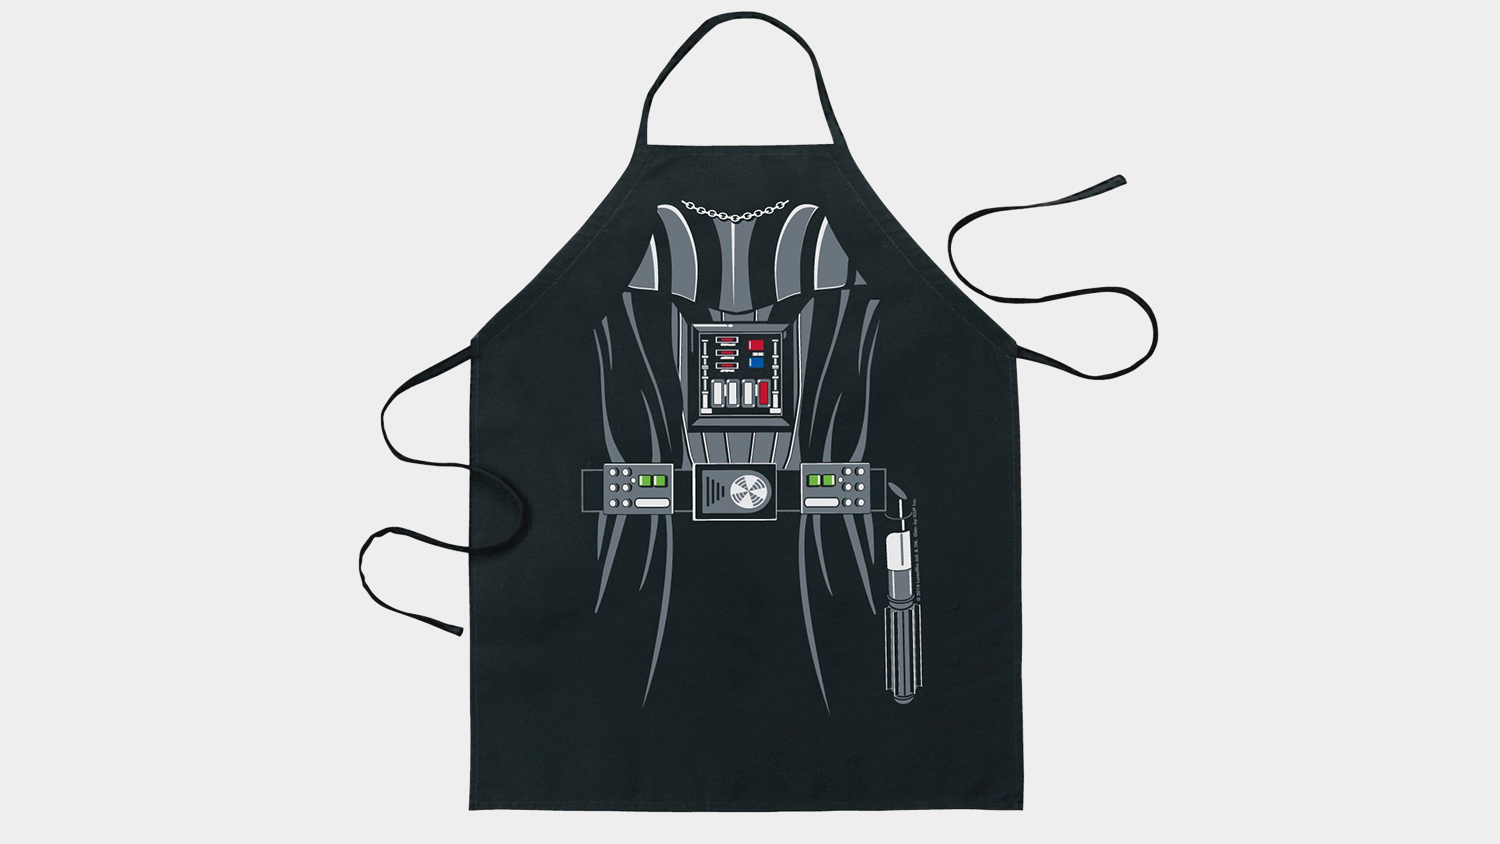 https://www.digitaltrends.com/wp-content/uploads/2015/12/ICUP-Star-Wars-Character-Aprons_.jpg?fit=1500%2C844&p=1